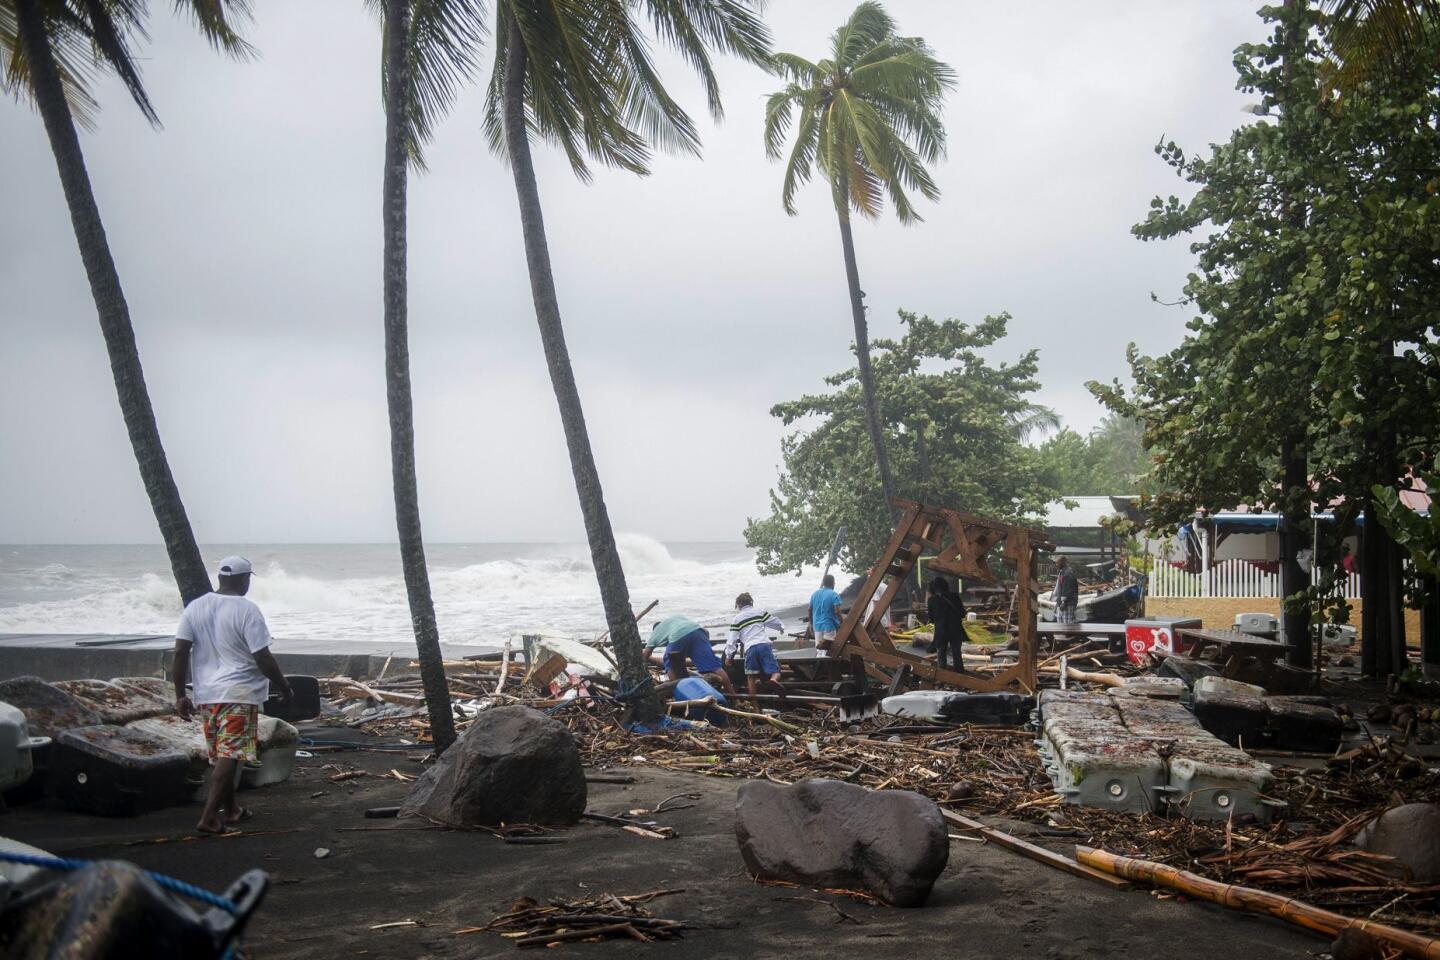 People walk amid debris of a restaurant shattered by Hurricane Maria in Le Carbet on the French Caribbean island of Martinique.